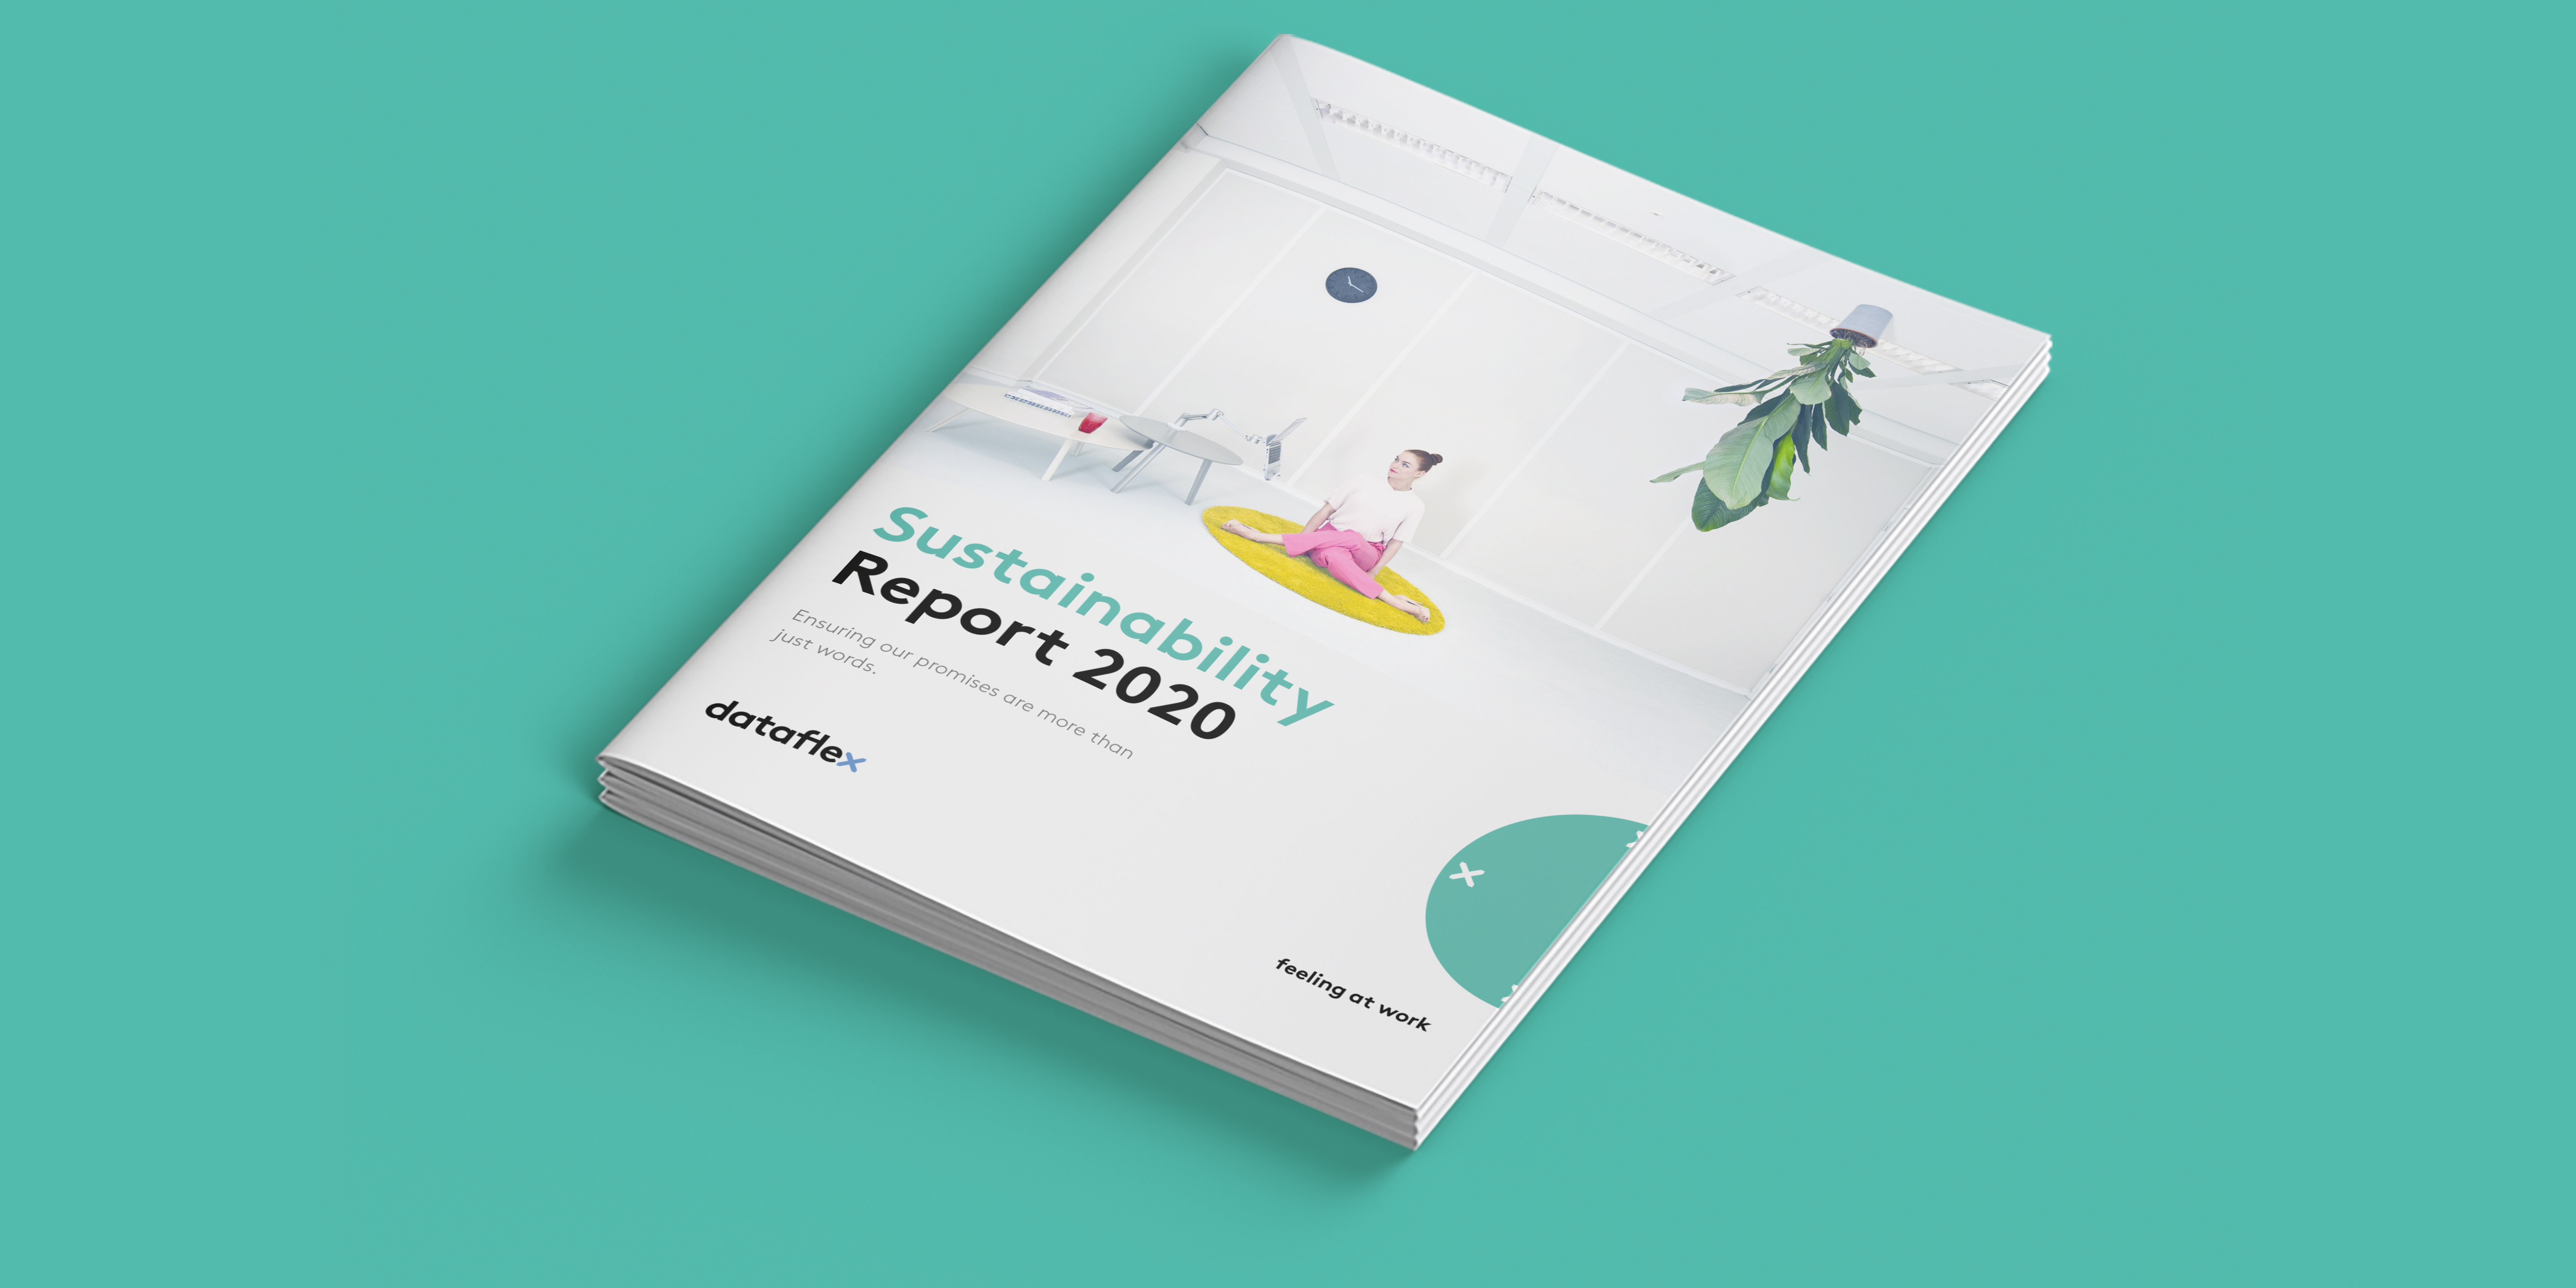 The Sustainability Report 2020 is online now!